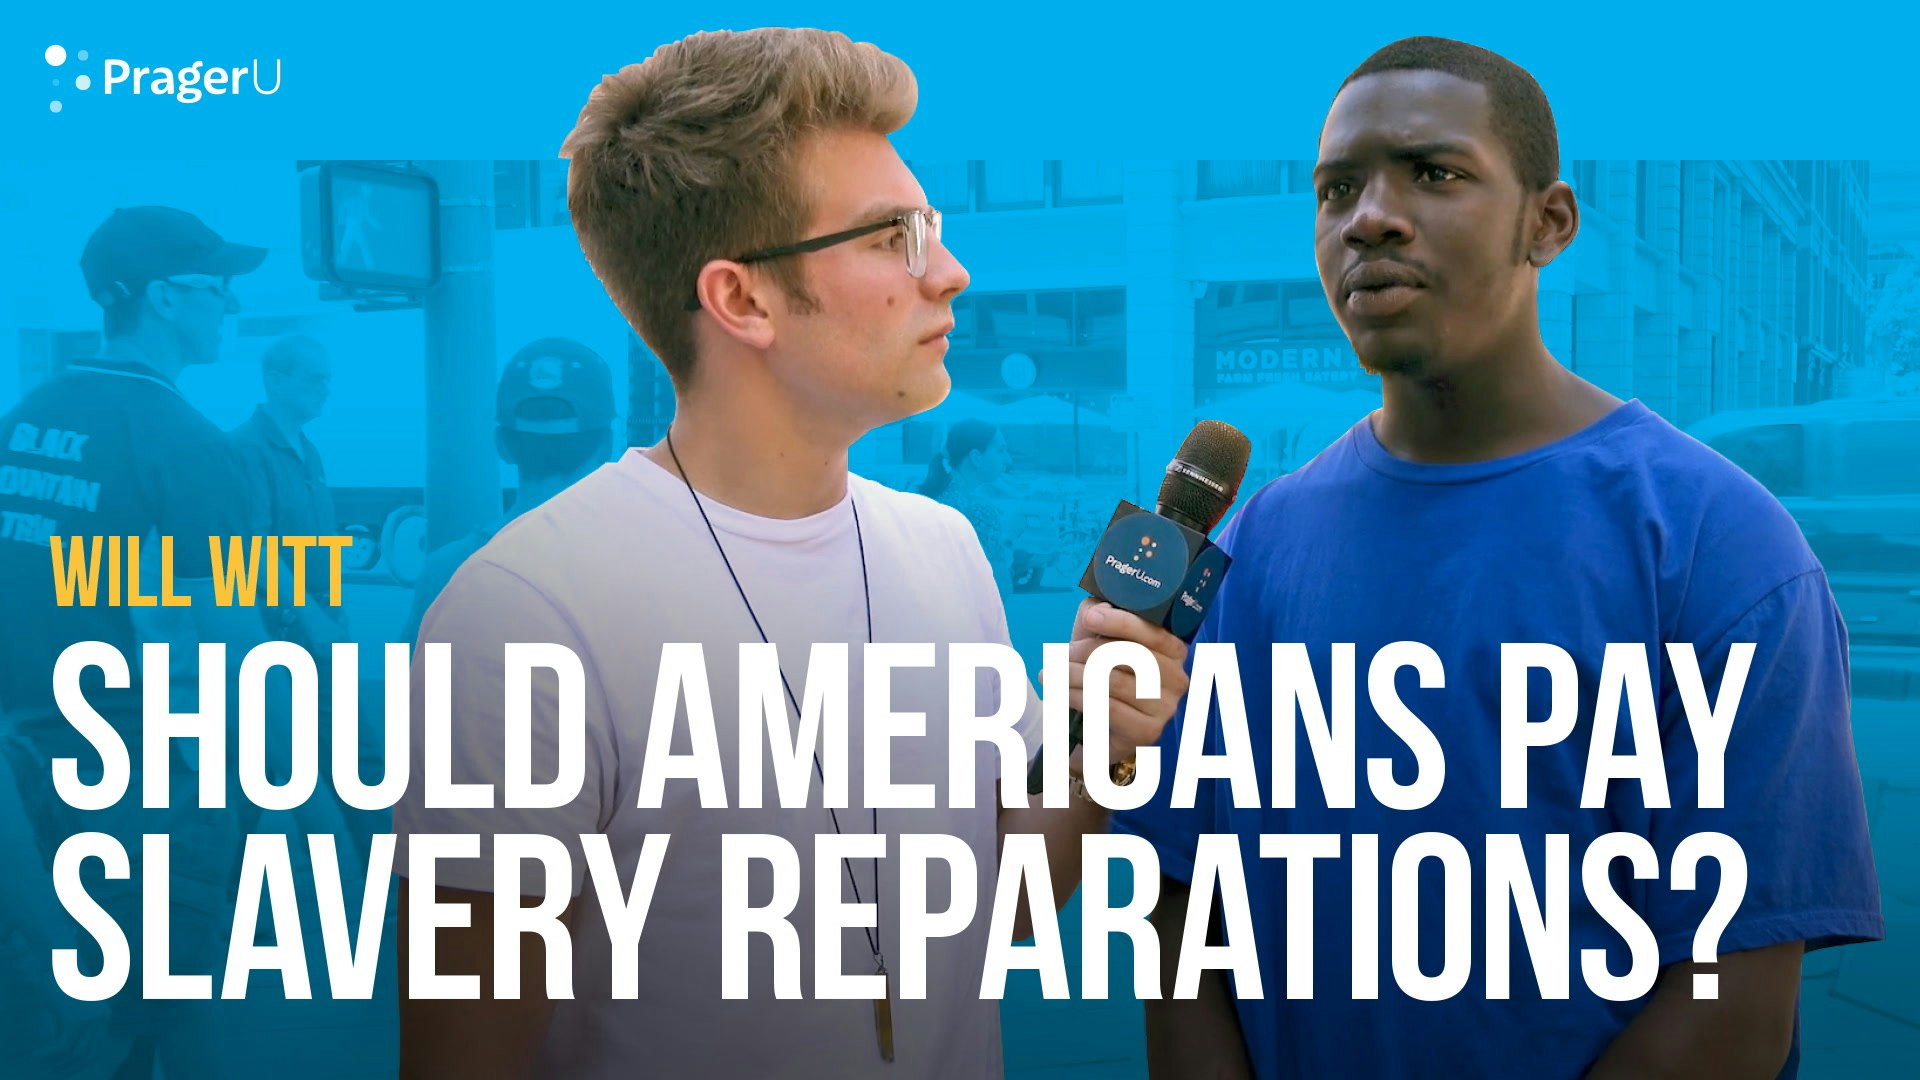 Should Americans Pay Slavery Reparations?